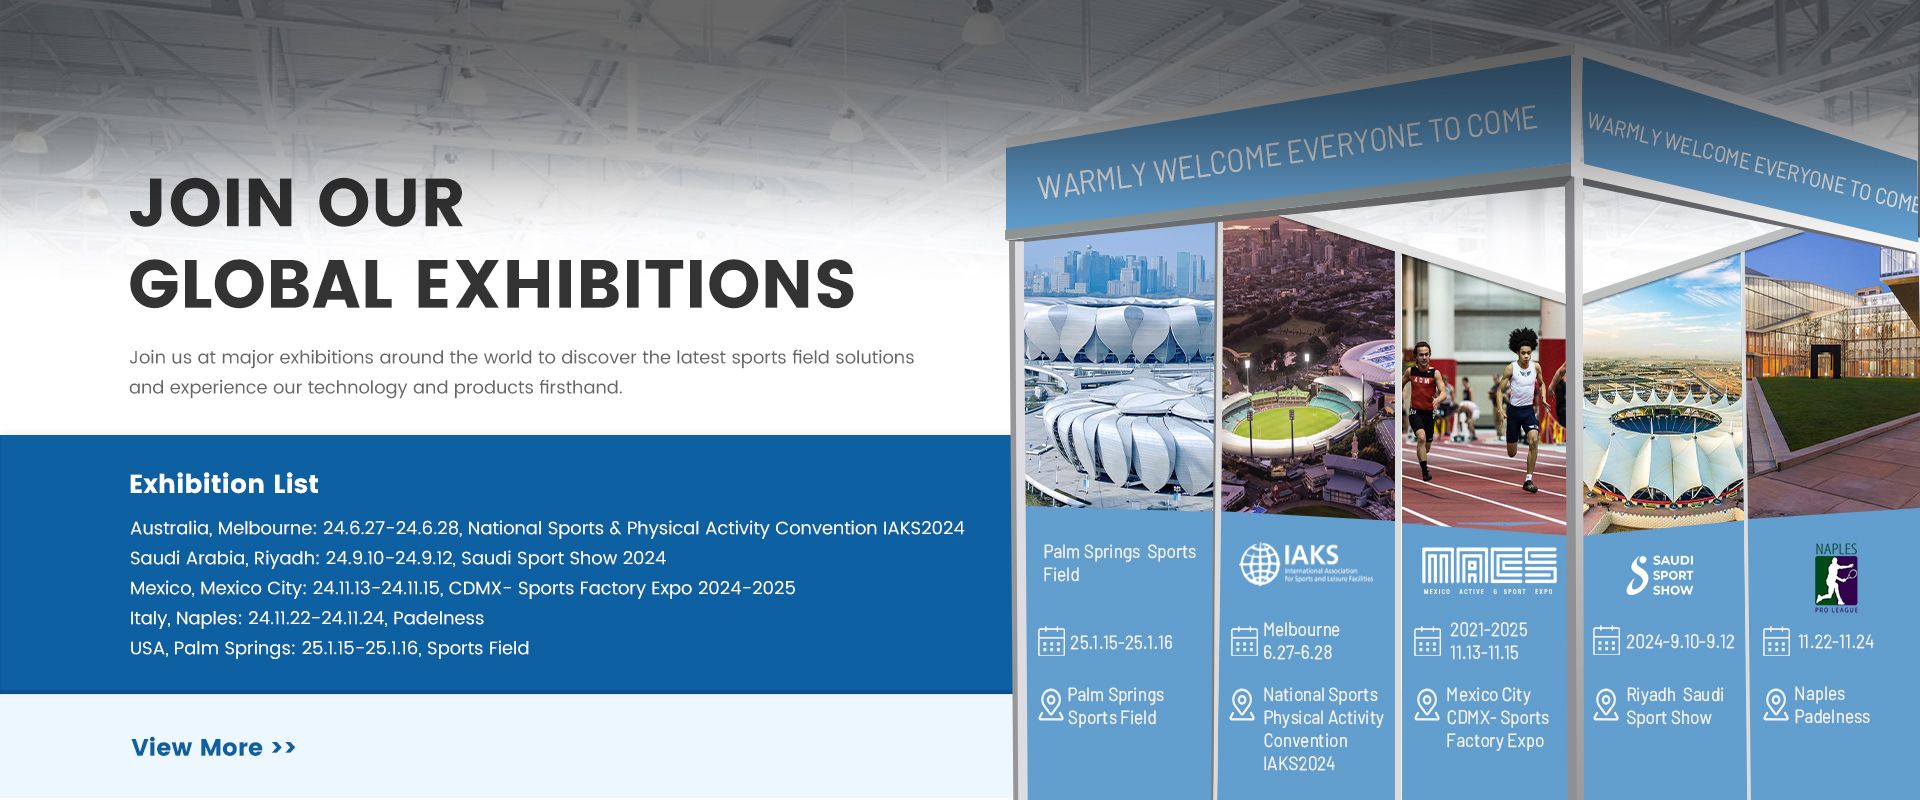 Join our global exhibitions